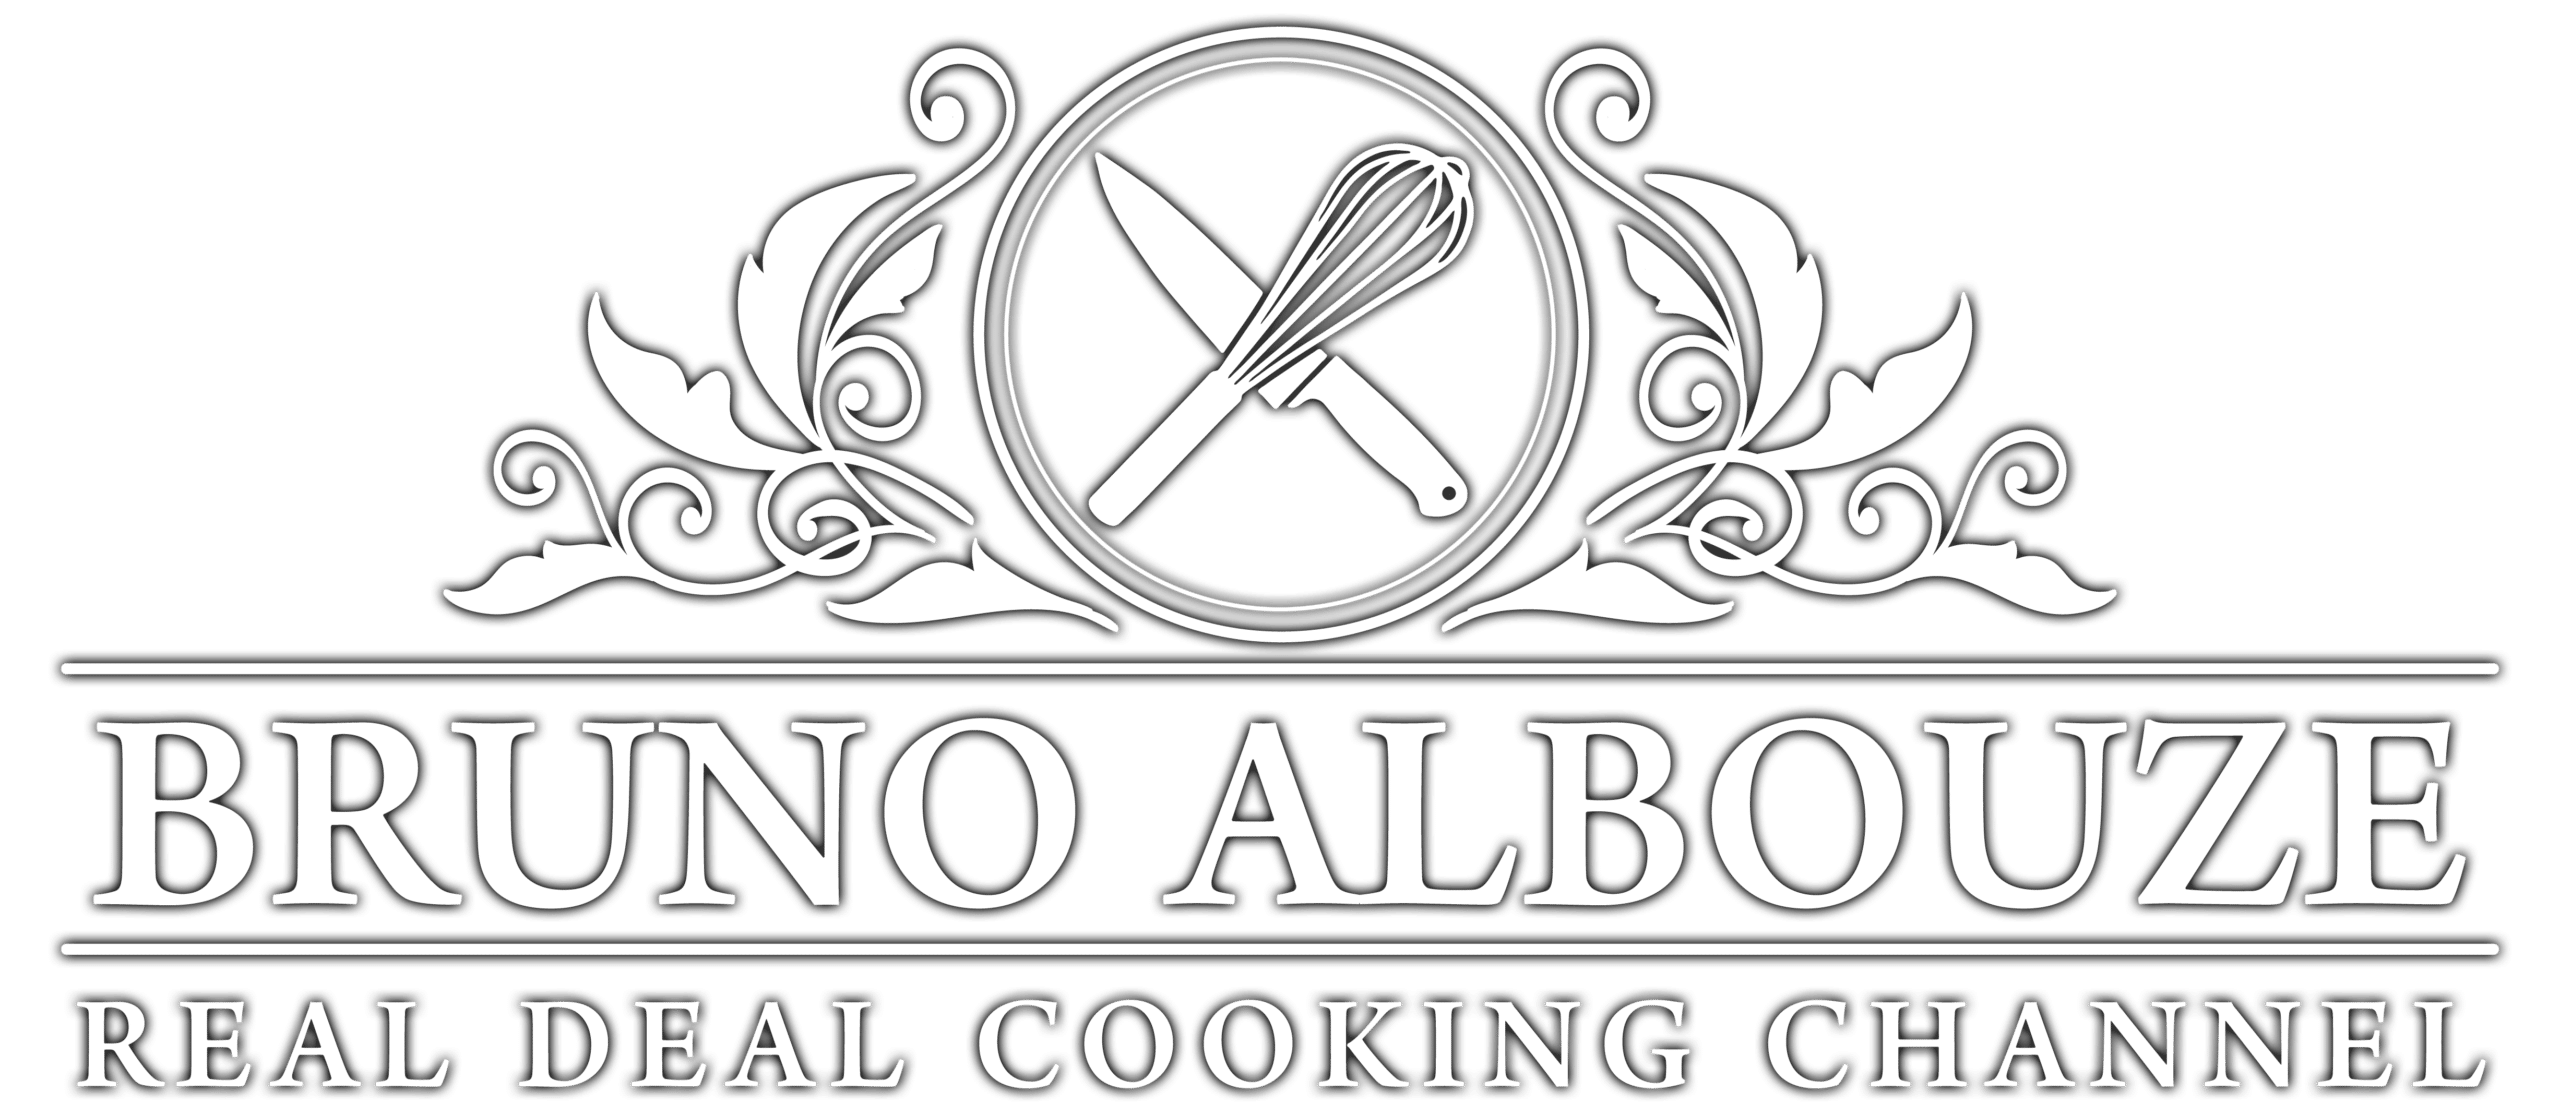 bruno albouze real deal cooking channel white logo